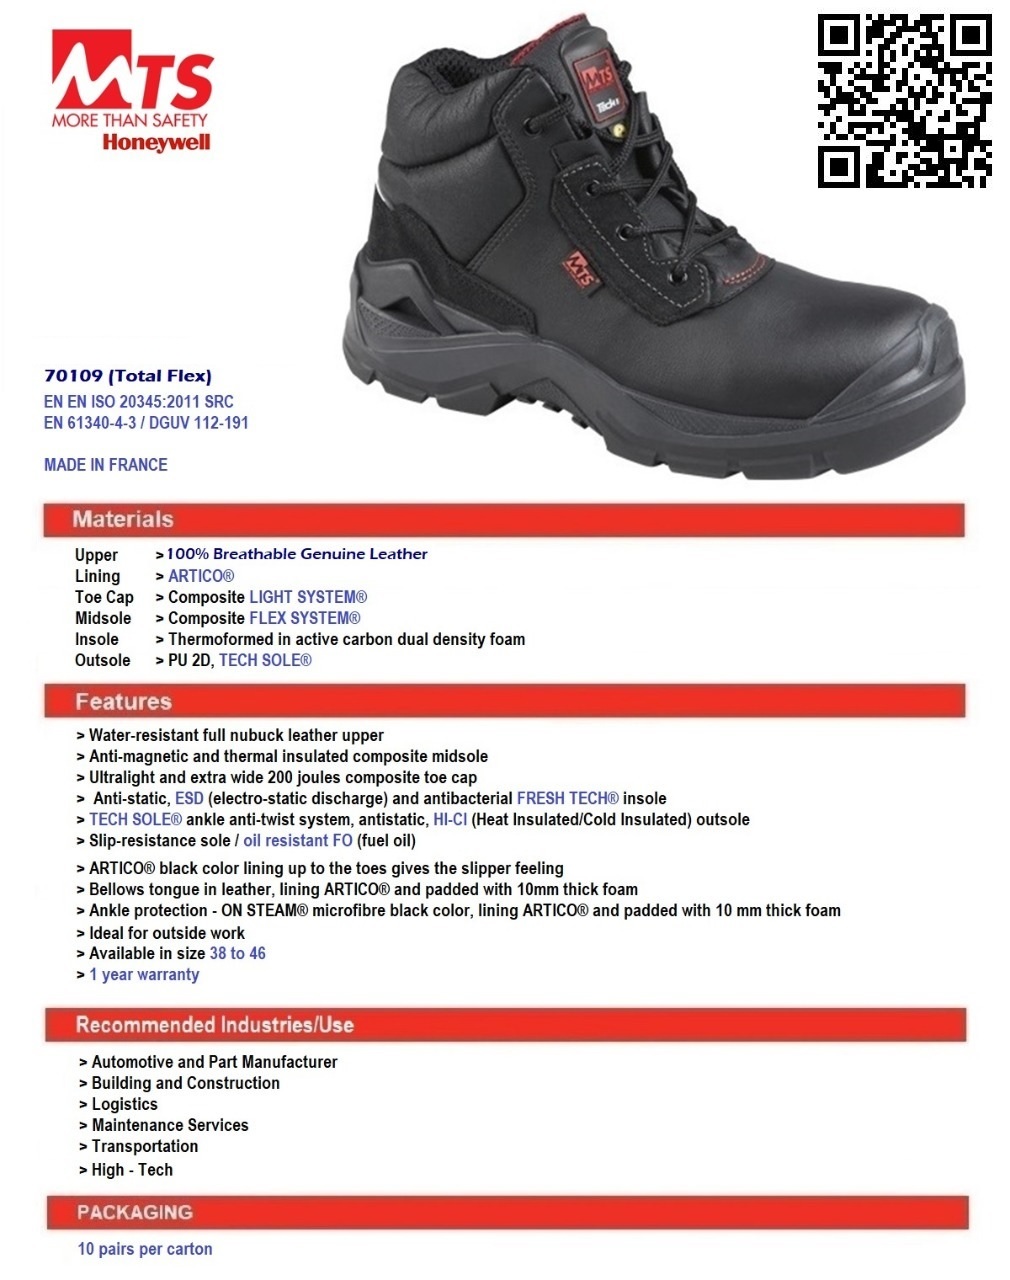 SAFETY SHOES HONEYWELL MTS 70109